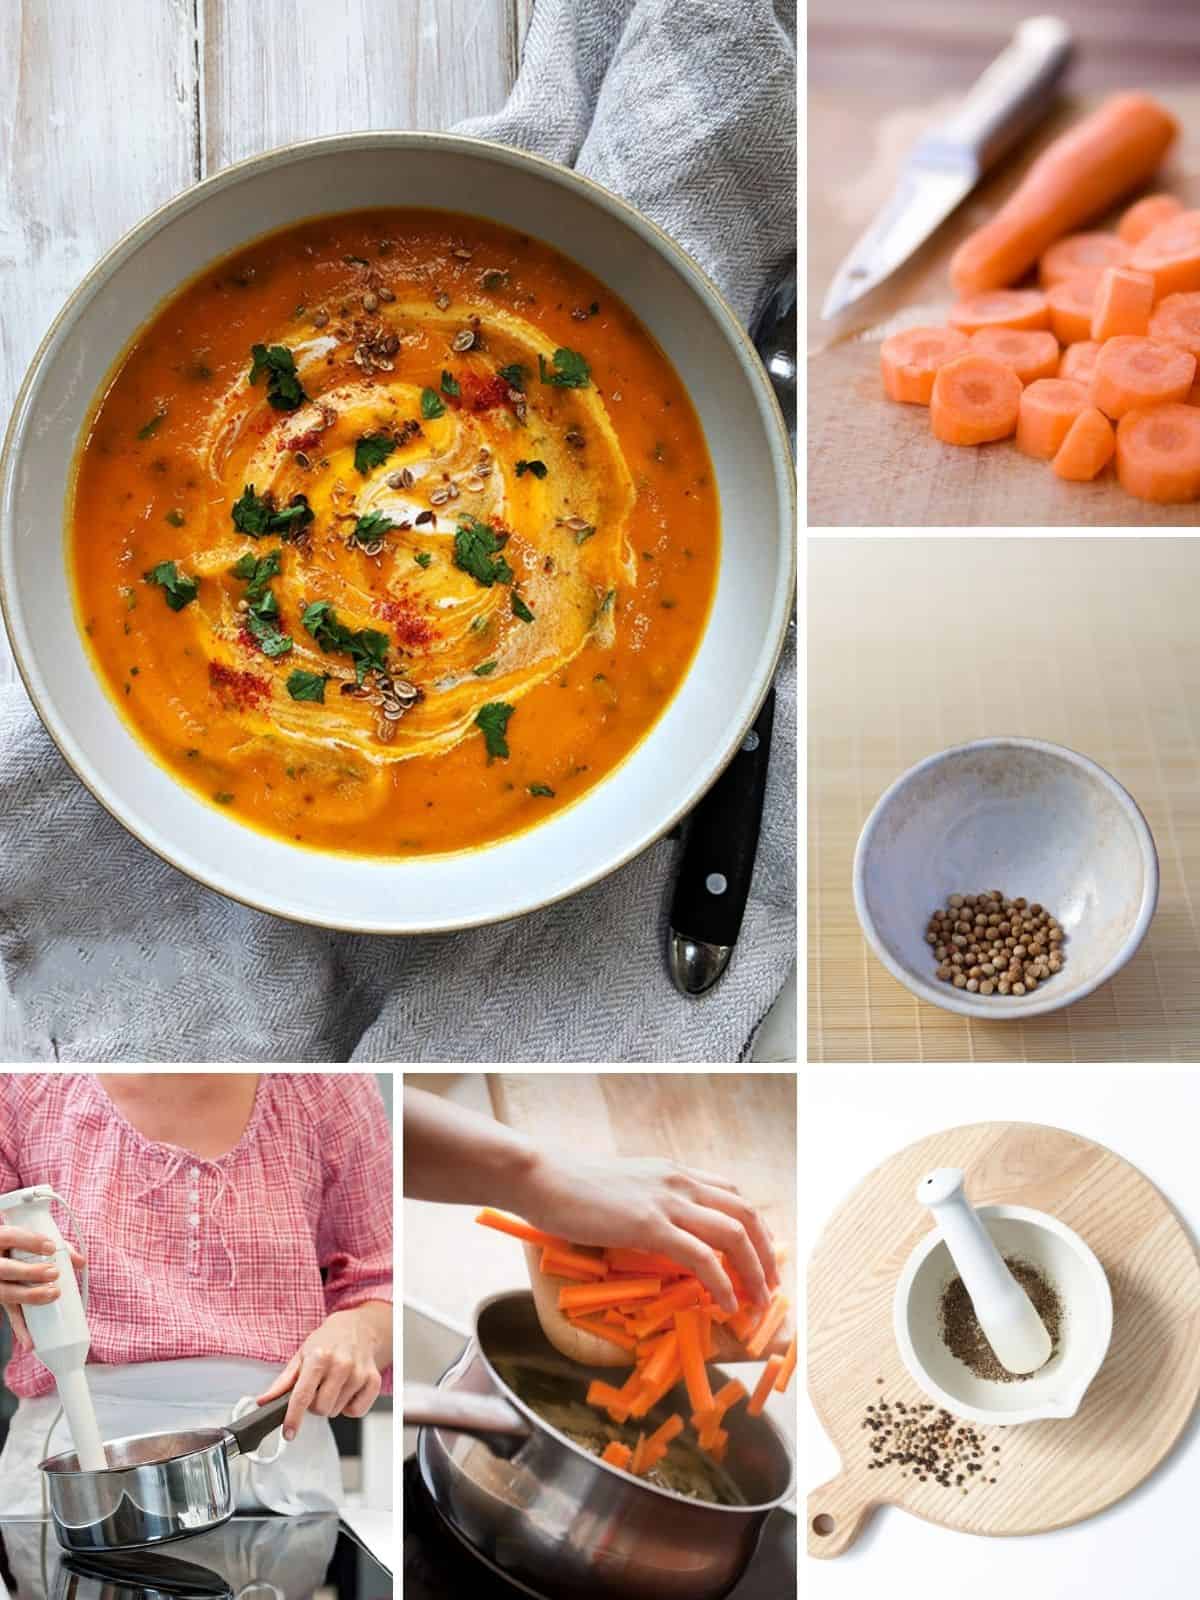 A collage of pictures showing the process of making carrot soup.